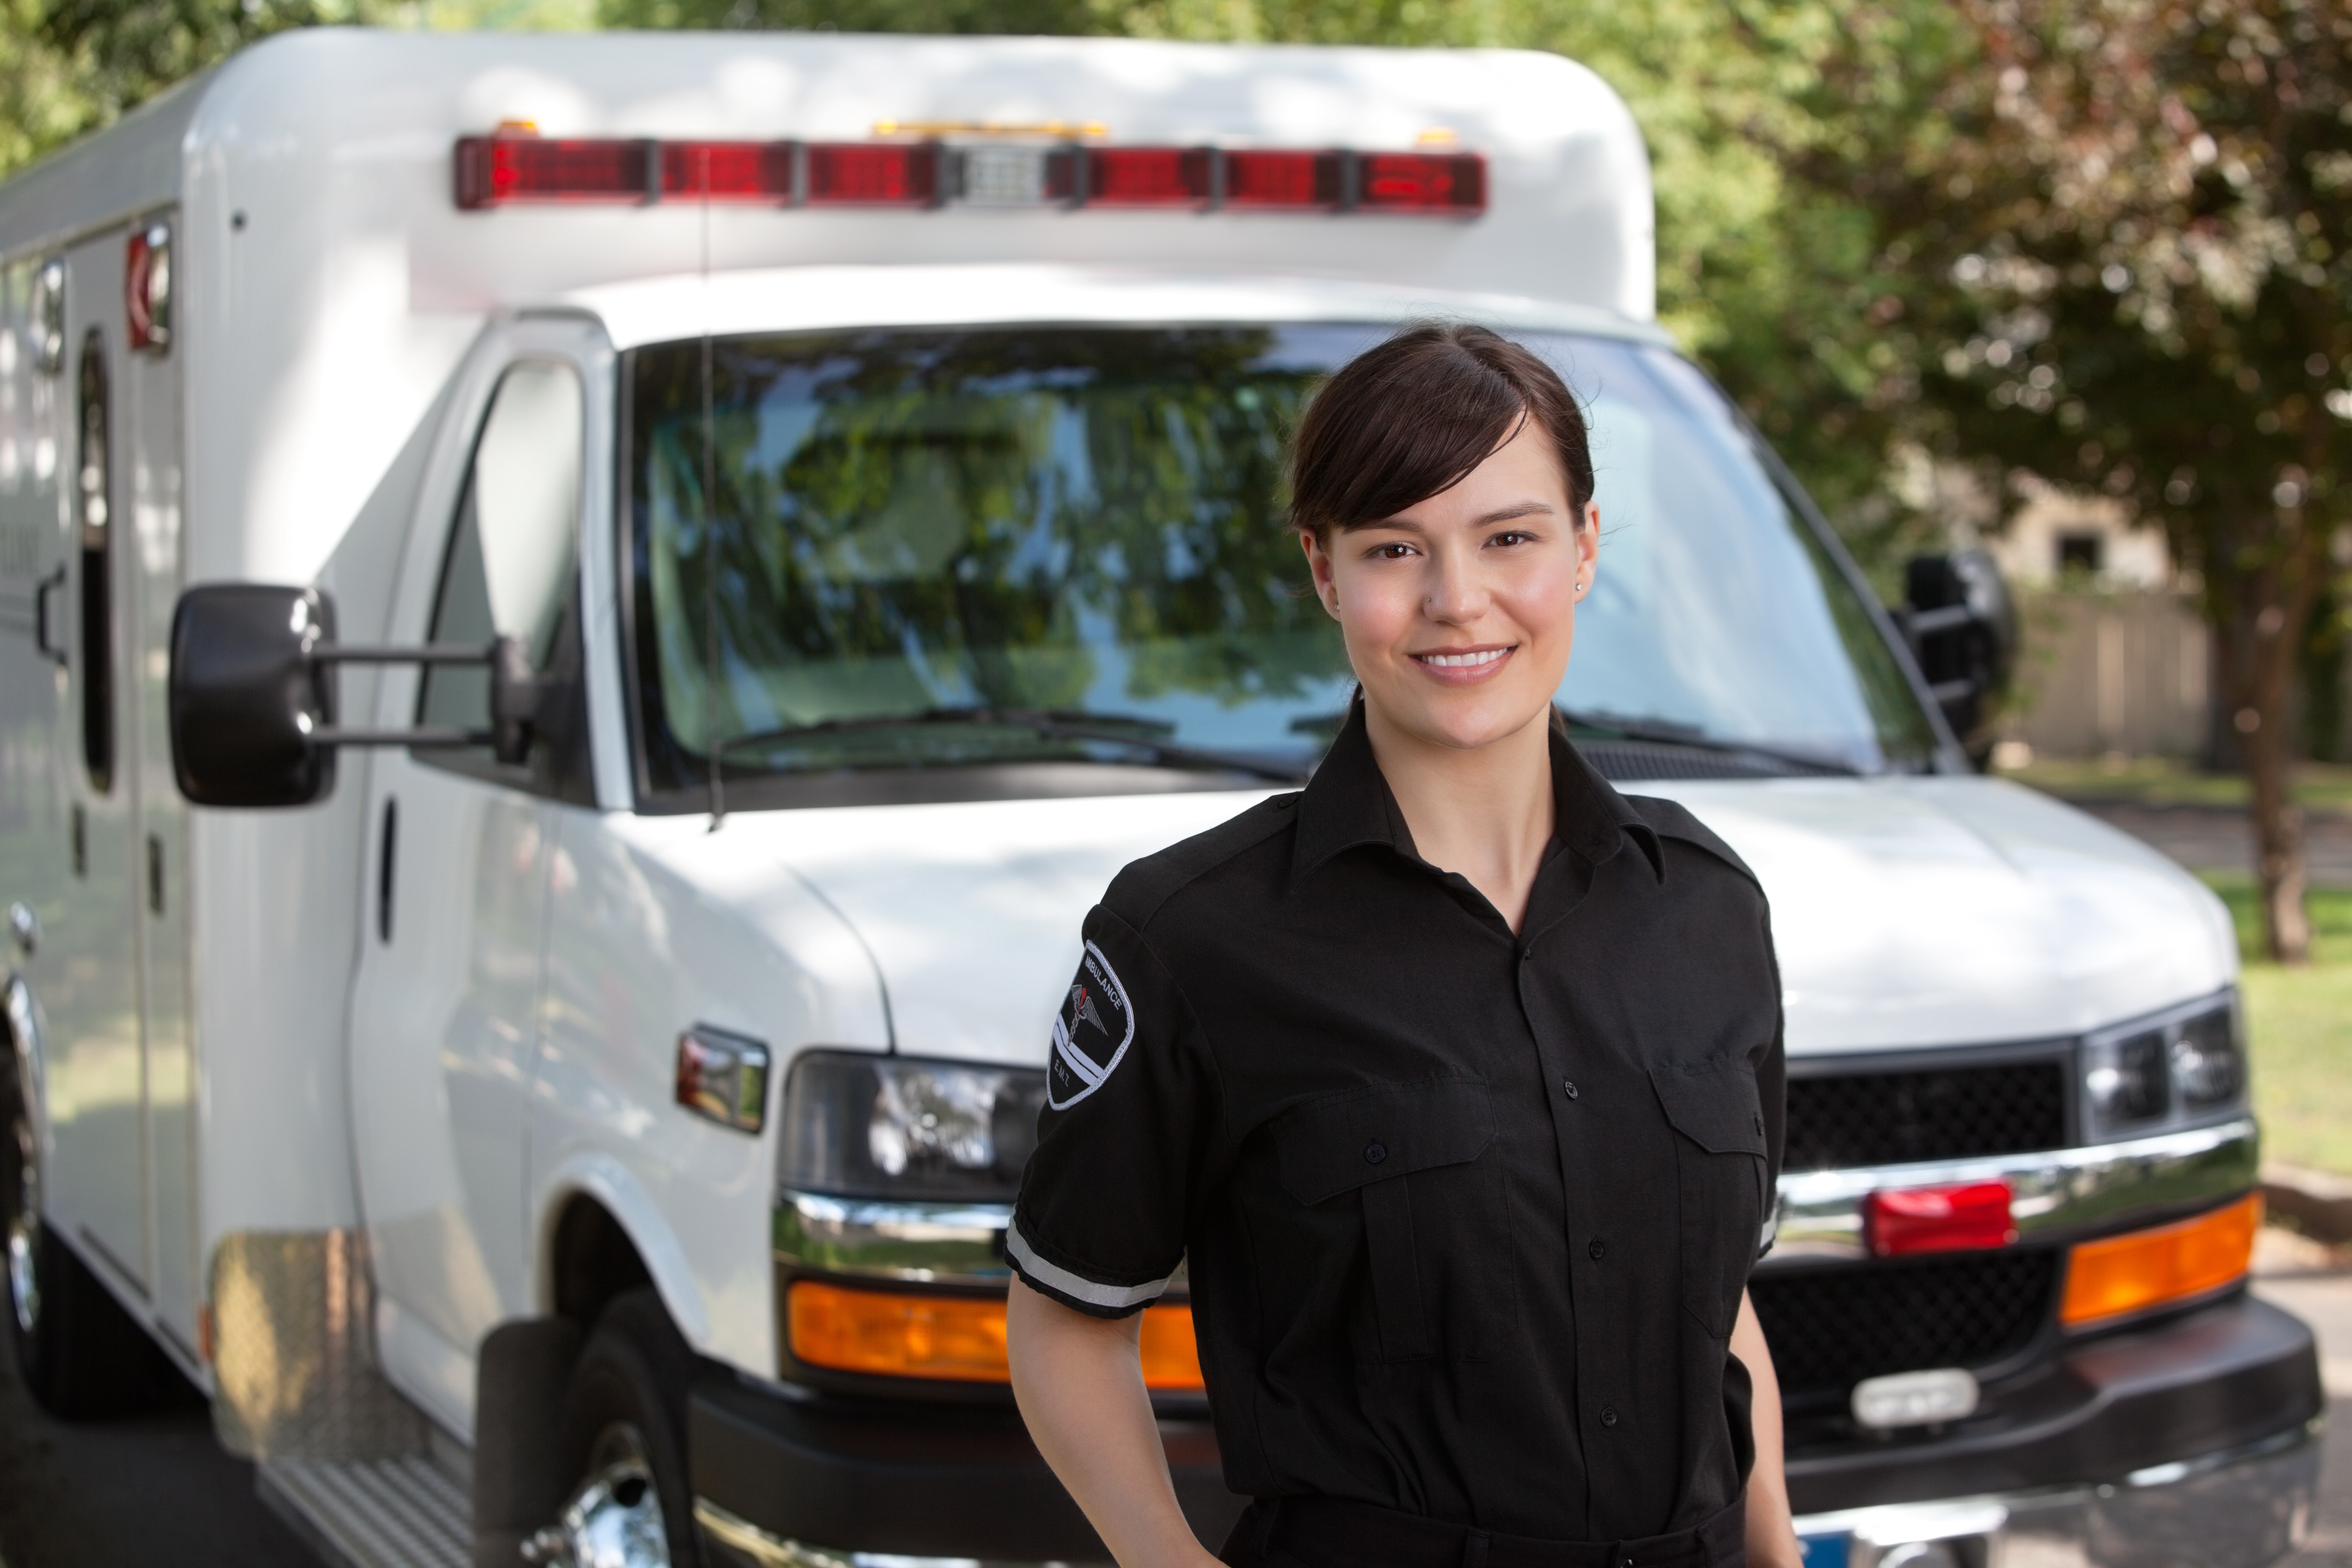 emt continuing education courses free